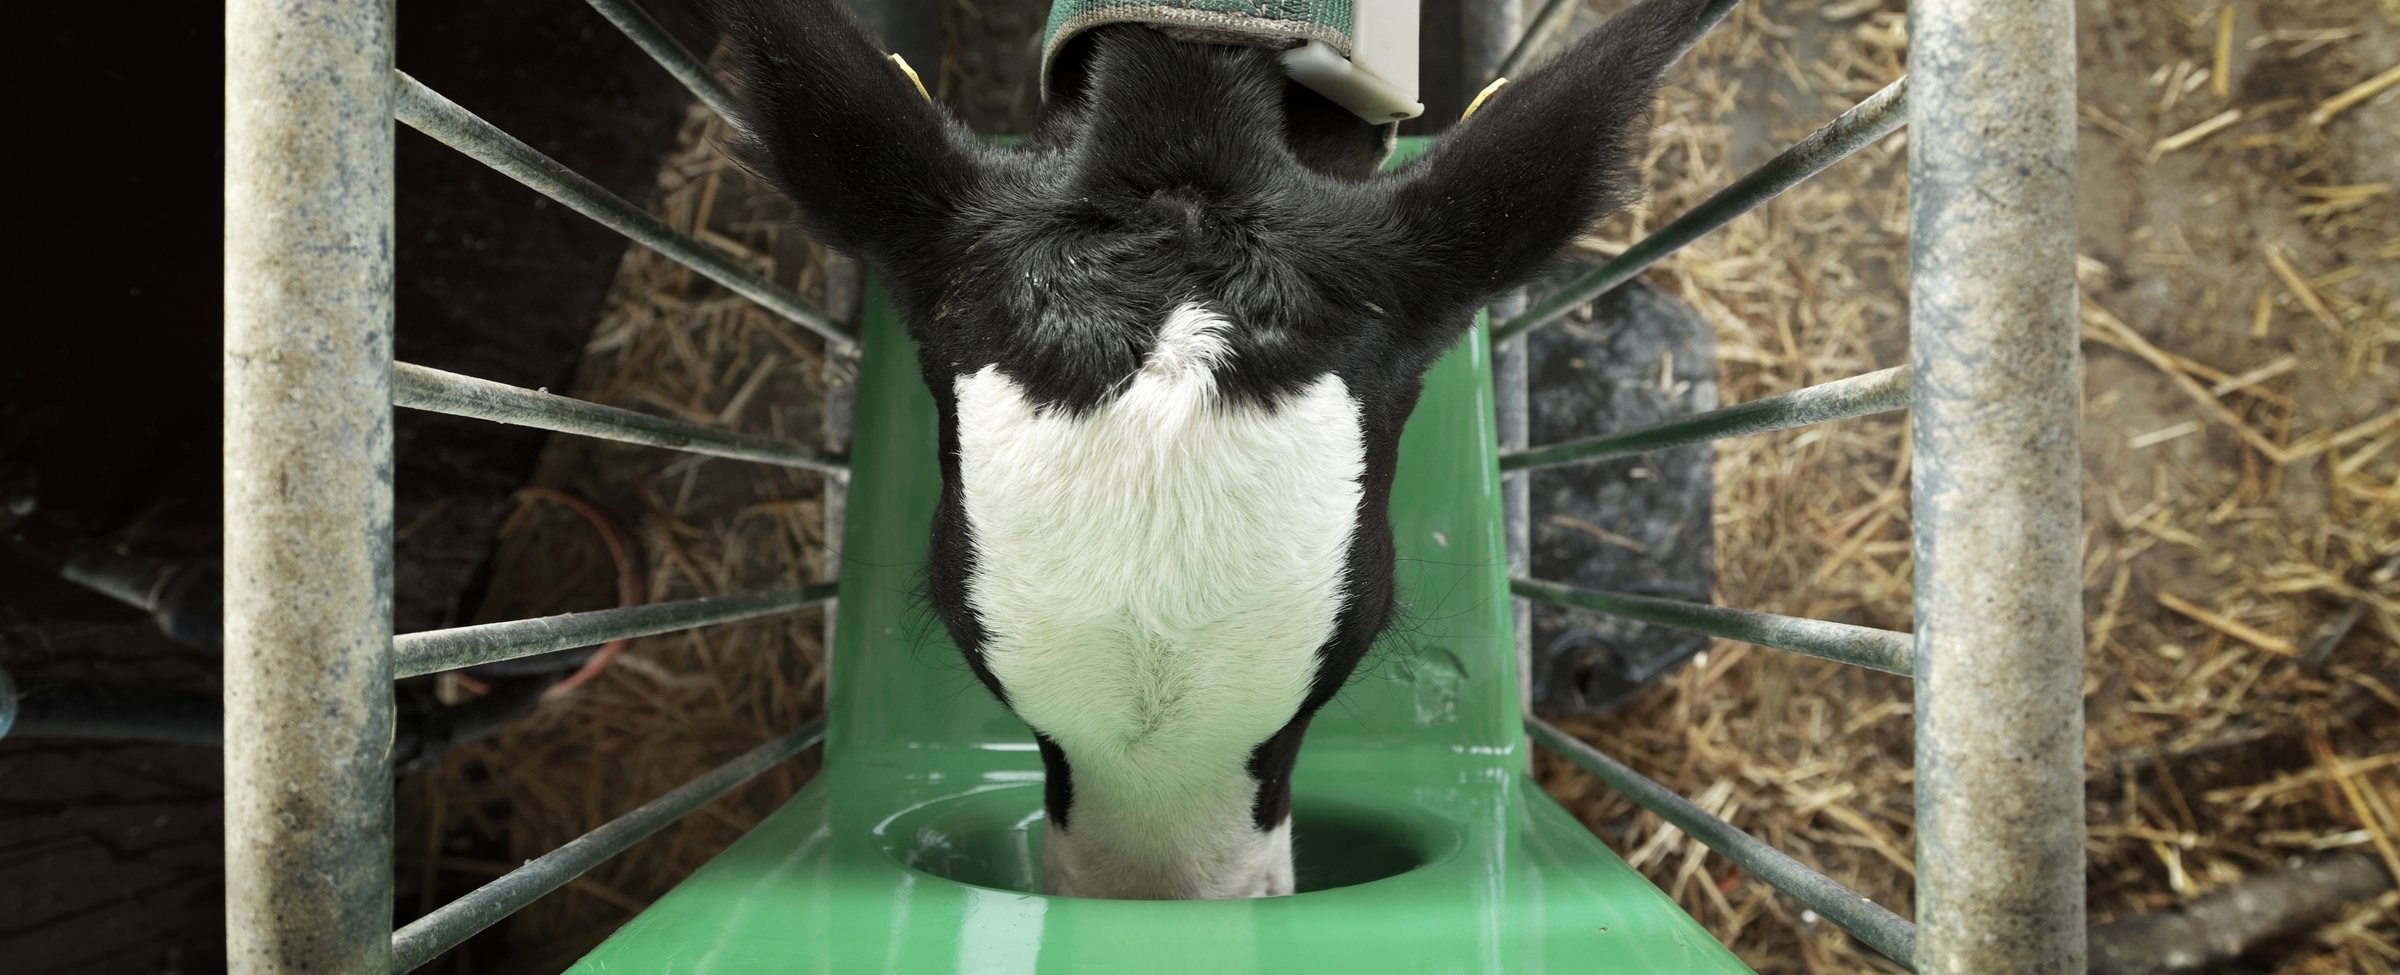 A strong performing calf, drinking from an automatic feeder